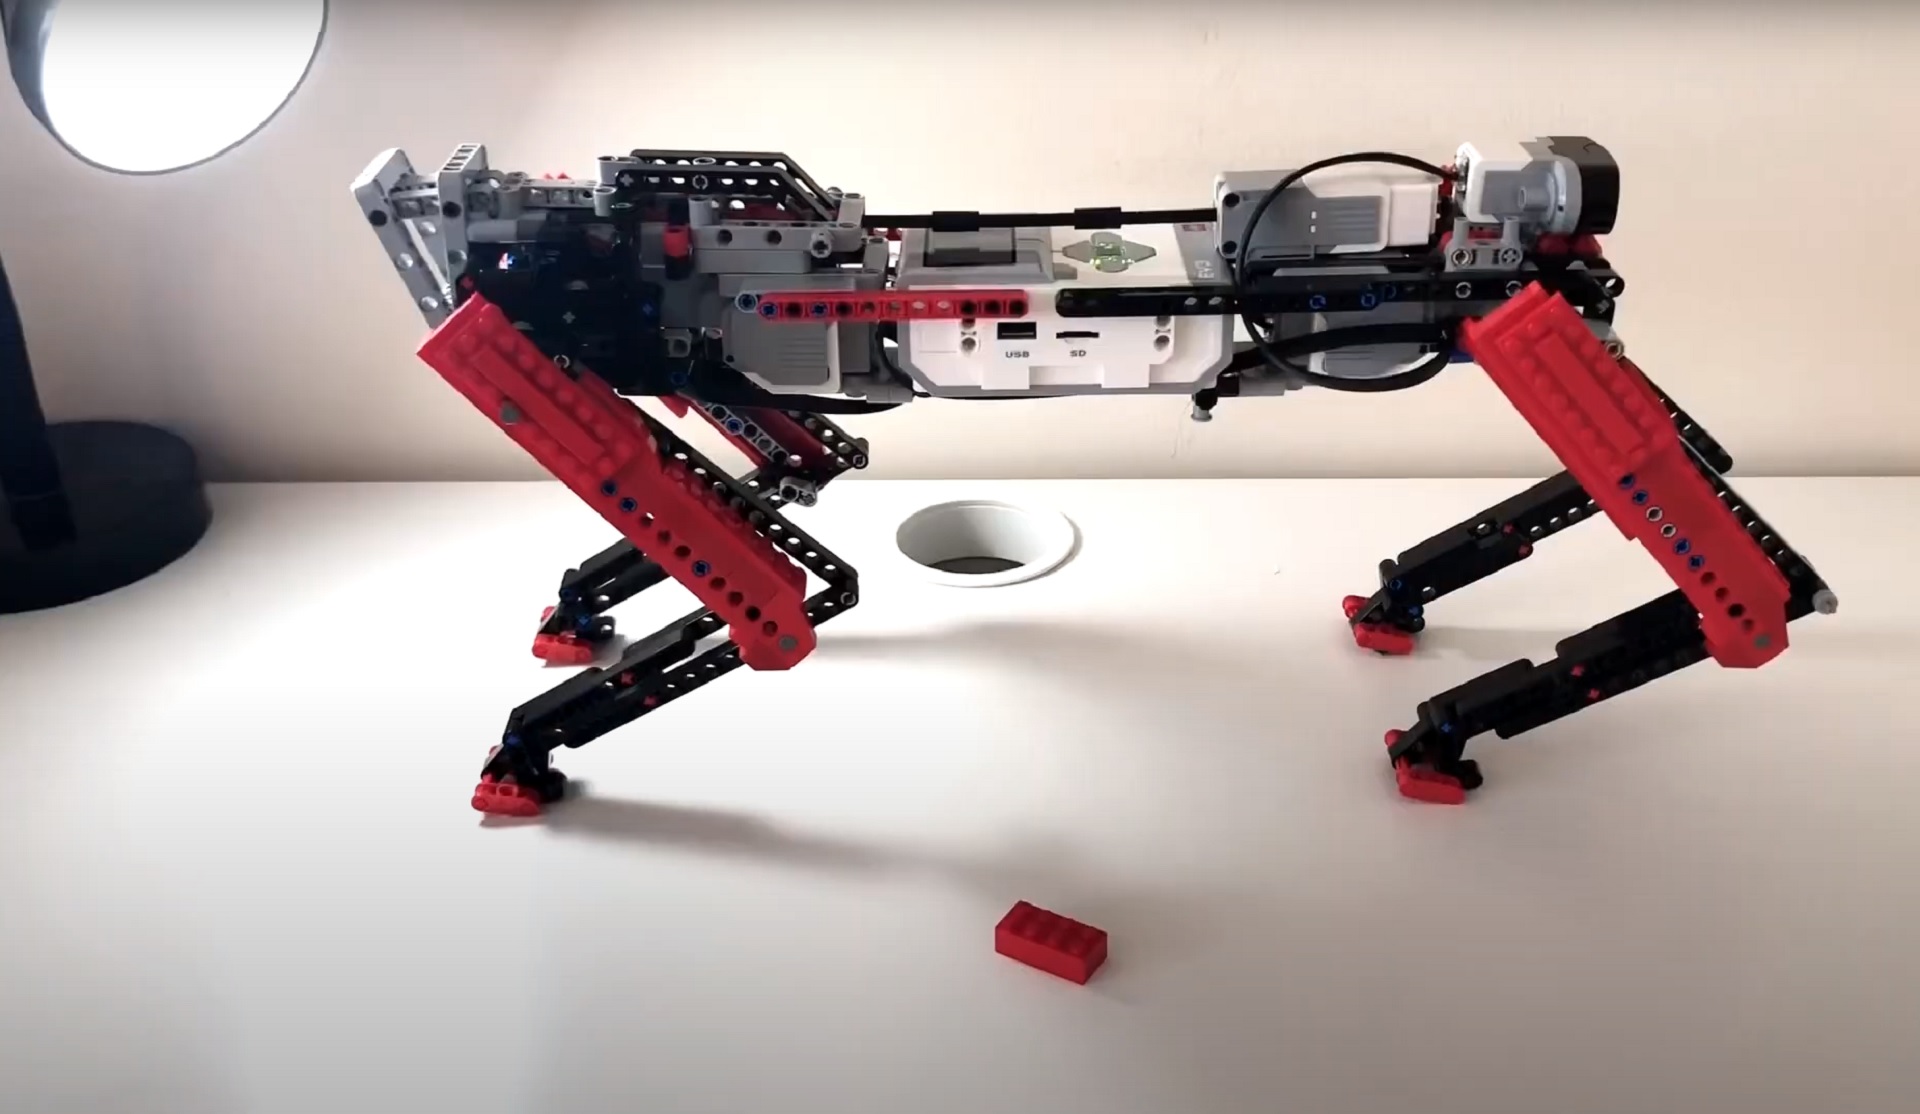 Spot-Inspired Robot Dog Is Almost as Smart but Made of LEGO, It Can Walk  and Dance - autoevolution